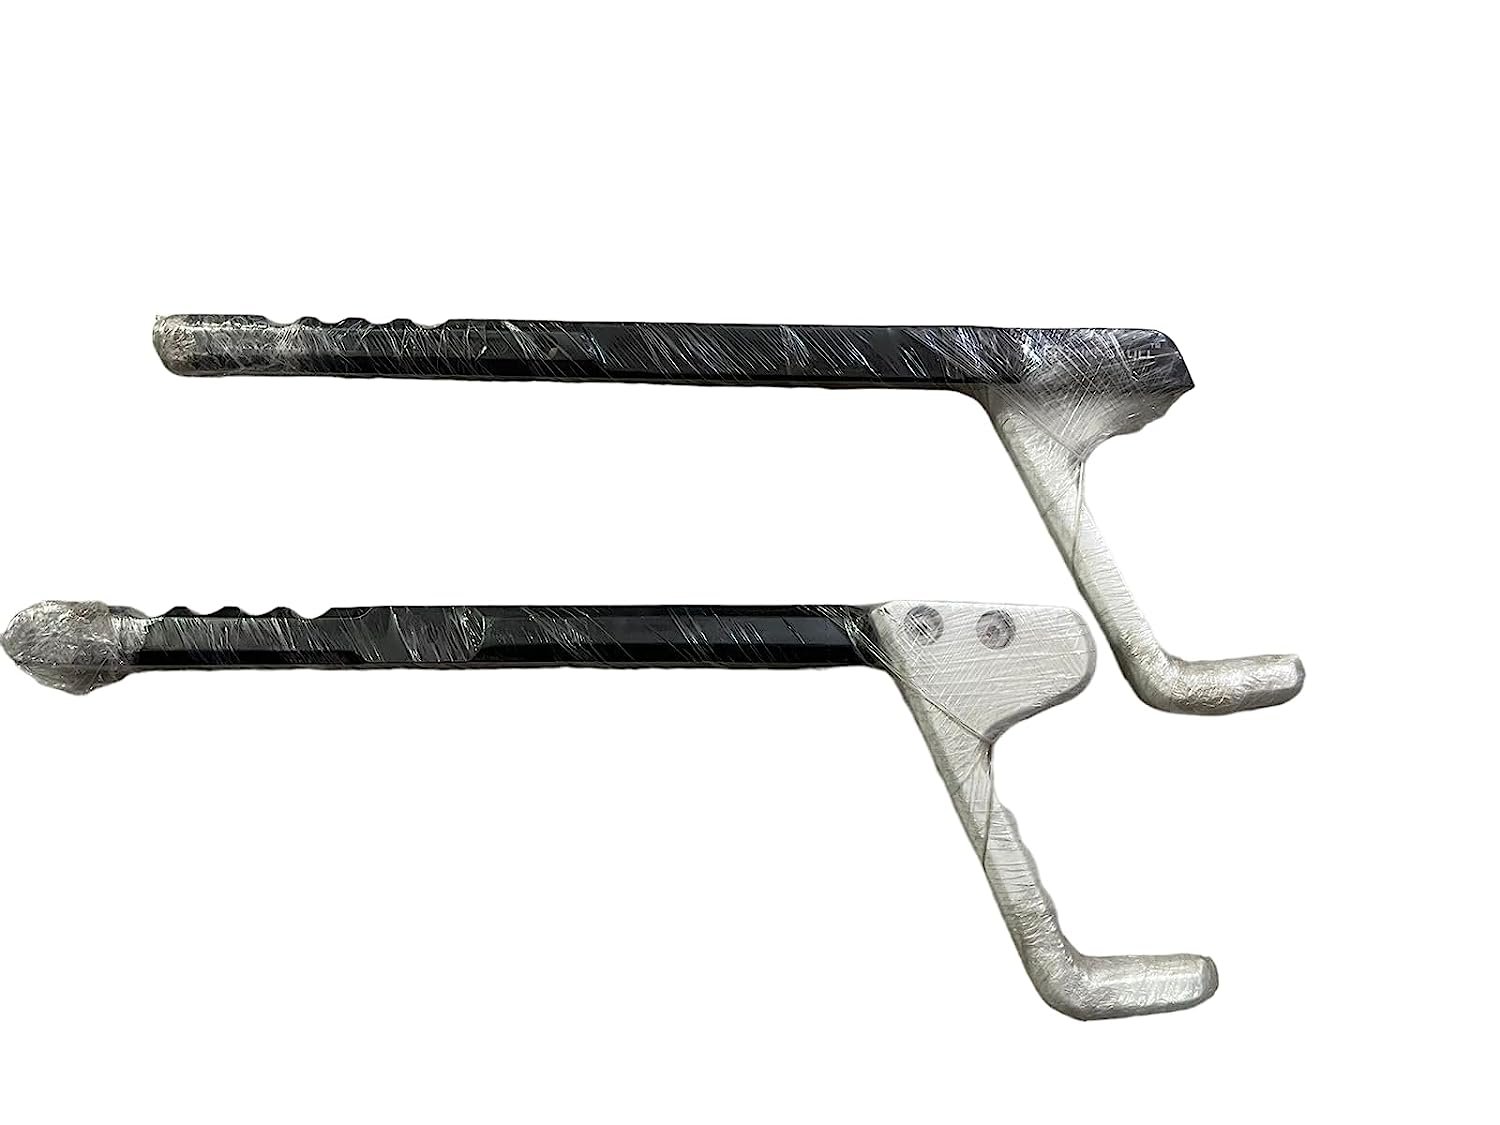 4x4 Grab Handle - white &Black, Strong, Heavy Duty, Compatible for Mahindra Thar 2021-2022 Grab Handle. Image 